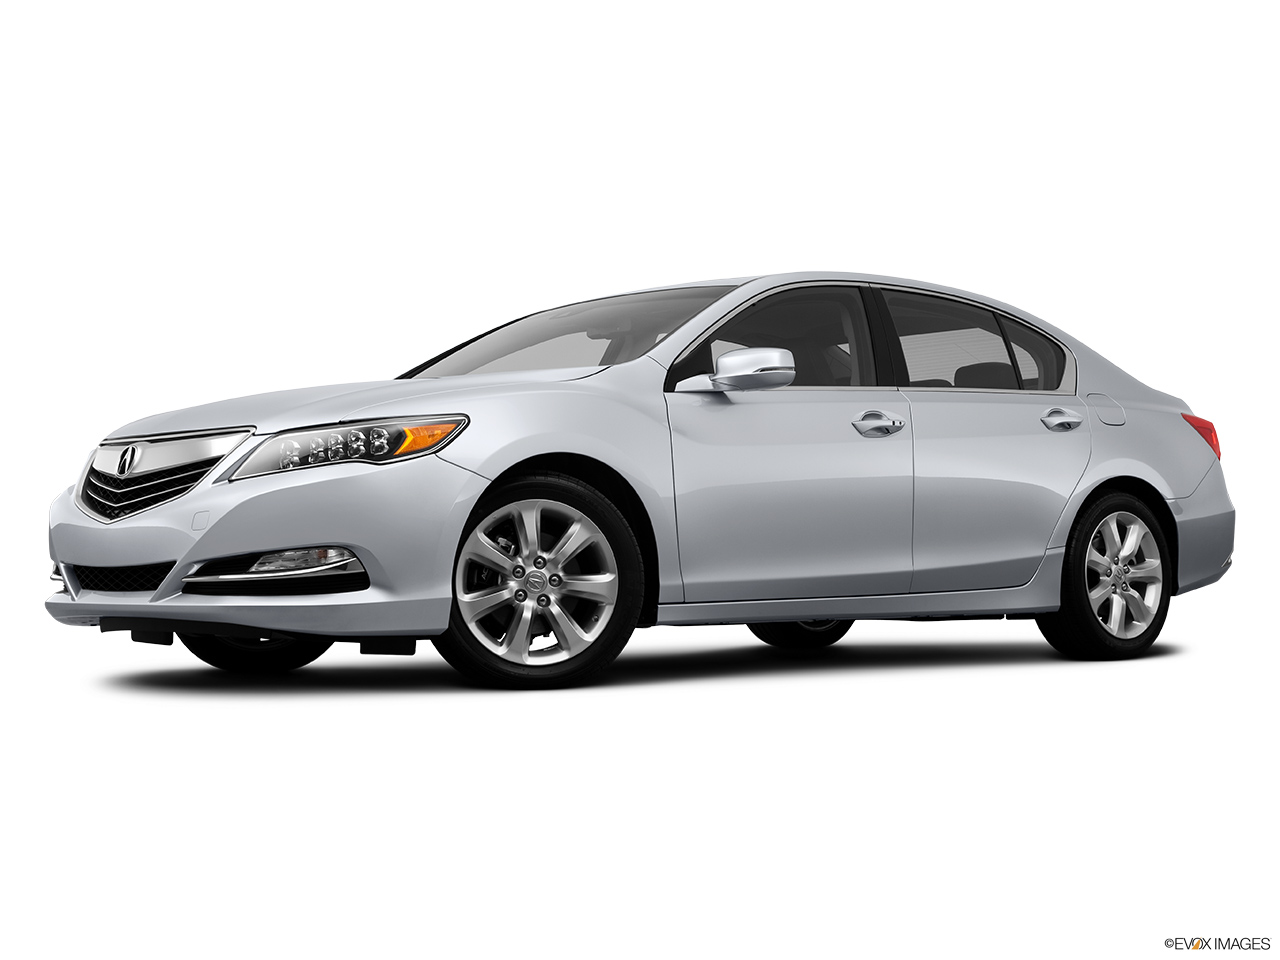 2014 Acura RLX Base Low/wide front 5/8. 